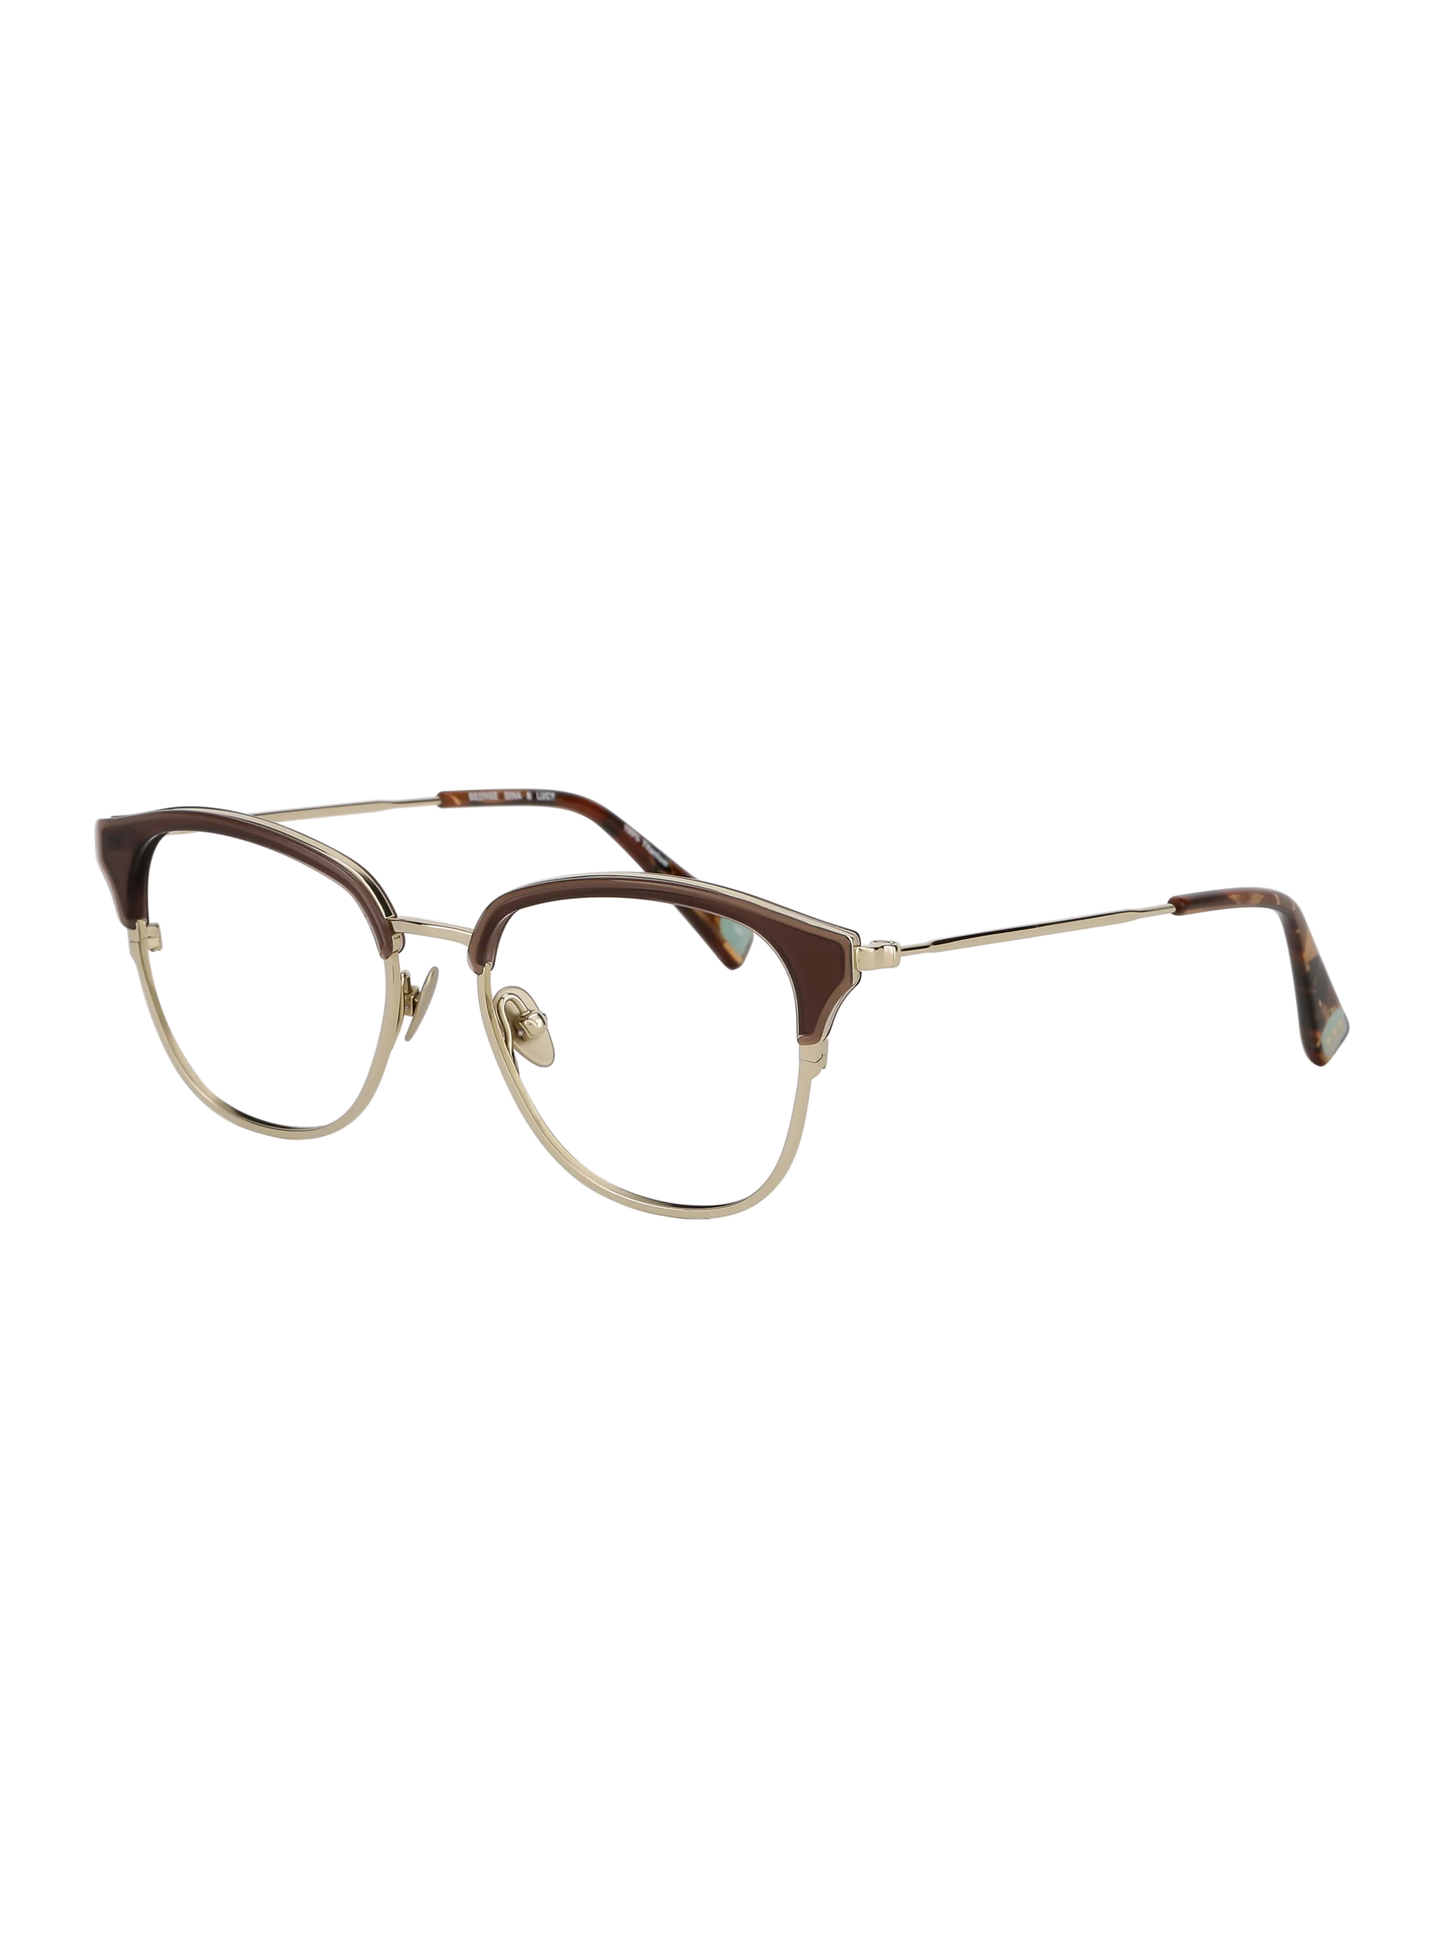 Farbe_champagne clear brown 001